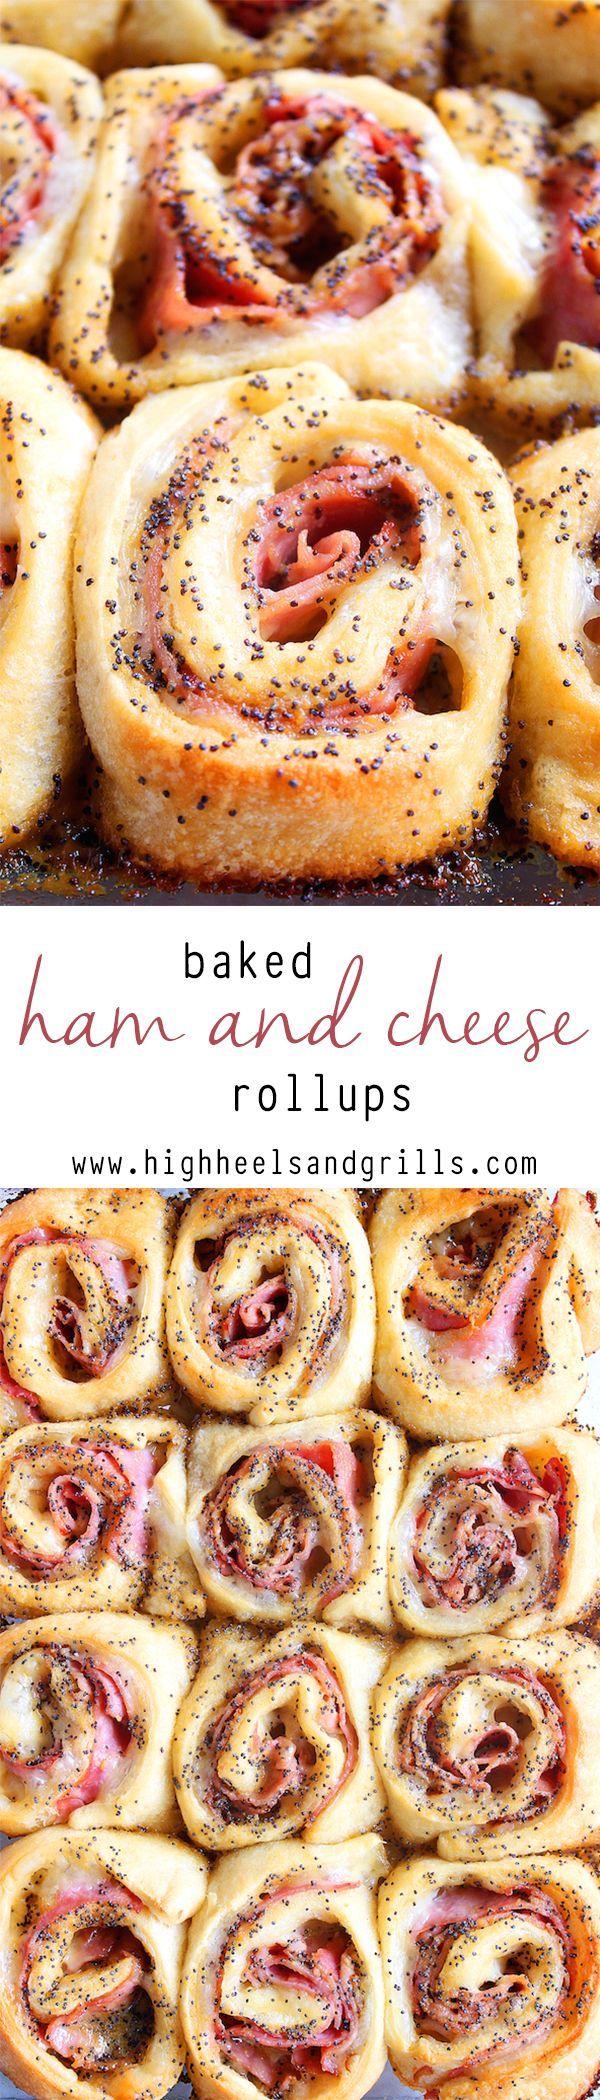 Hochzeit - Baked Ham And Cheese Rollups